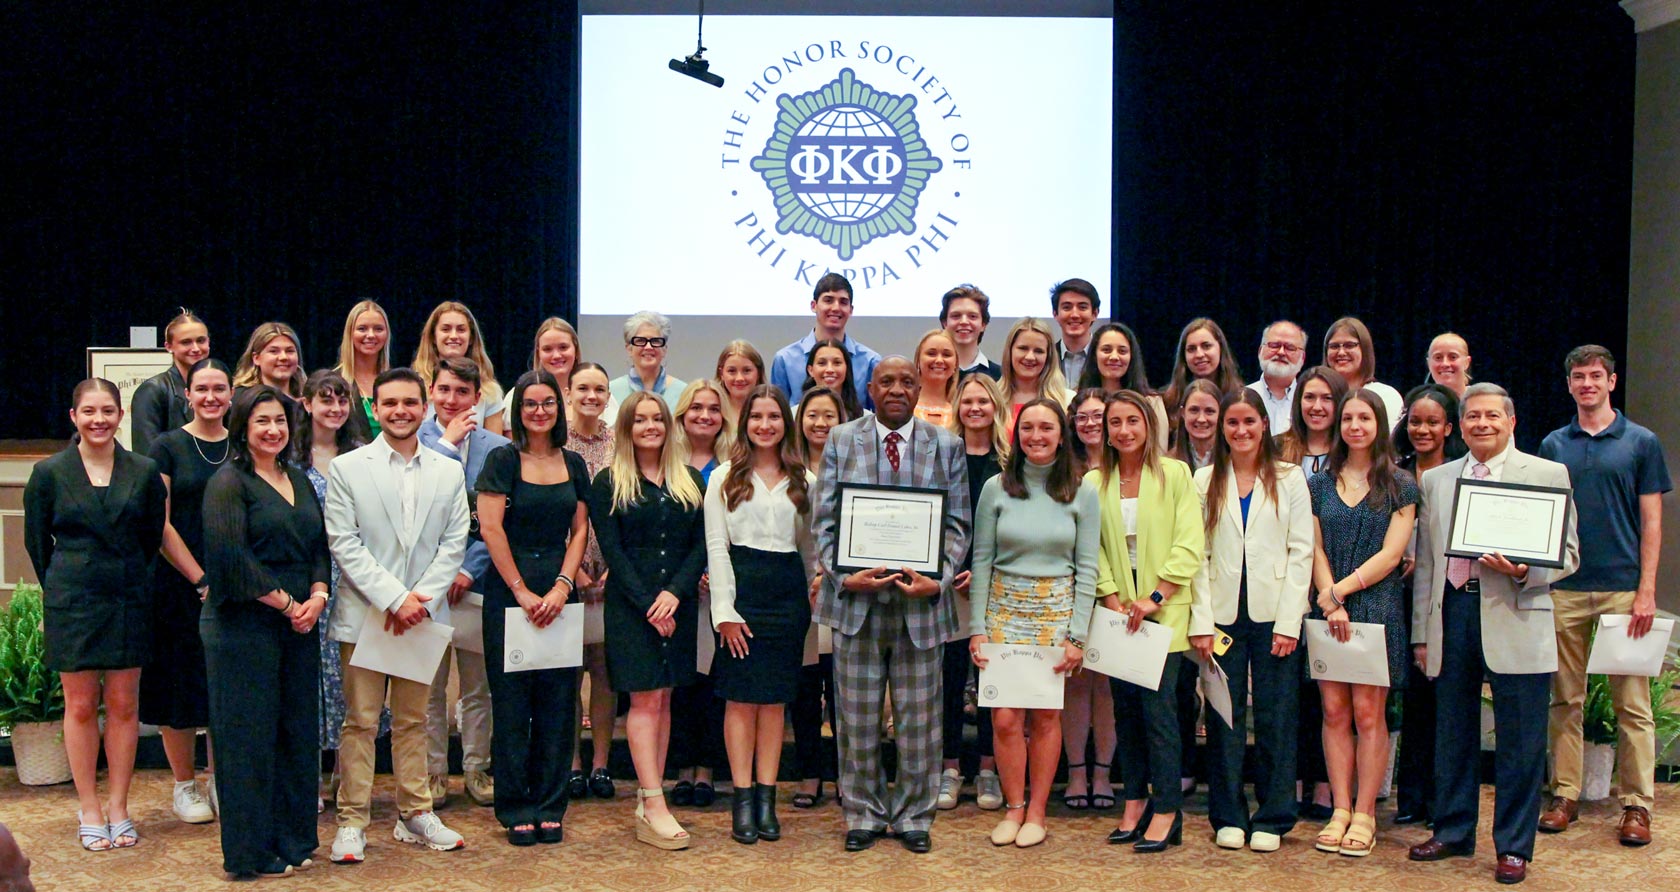 A substantial gathering of newly initiated Phi Kappa Phi members stands united on a stage, with the Phi Kappa Phi logo displayed on a background screen. Several members proudly hold certificates.